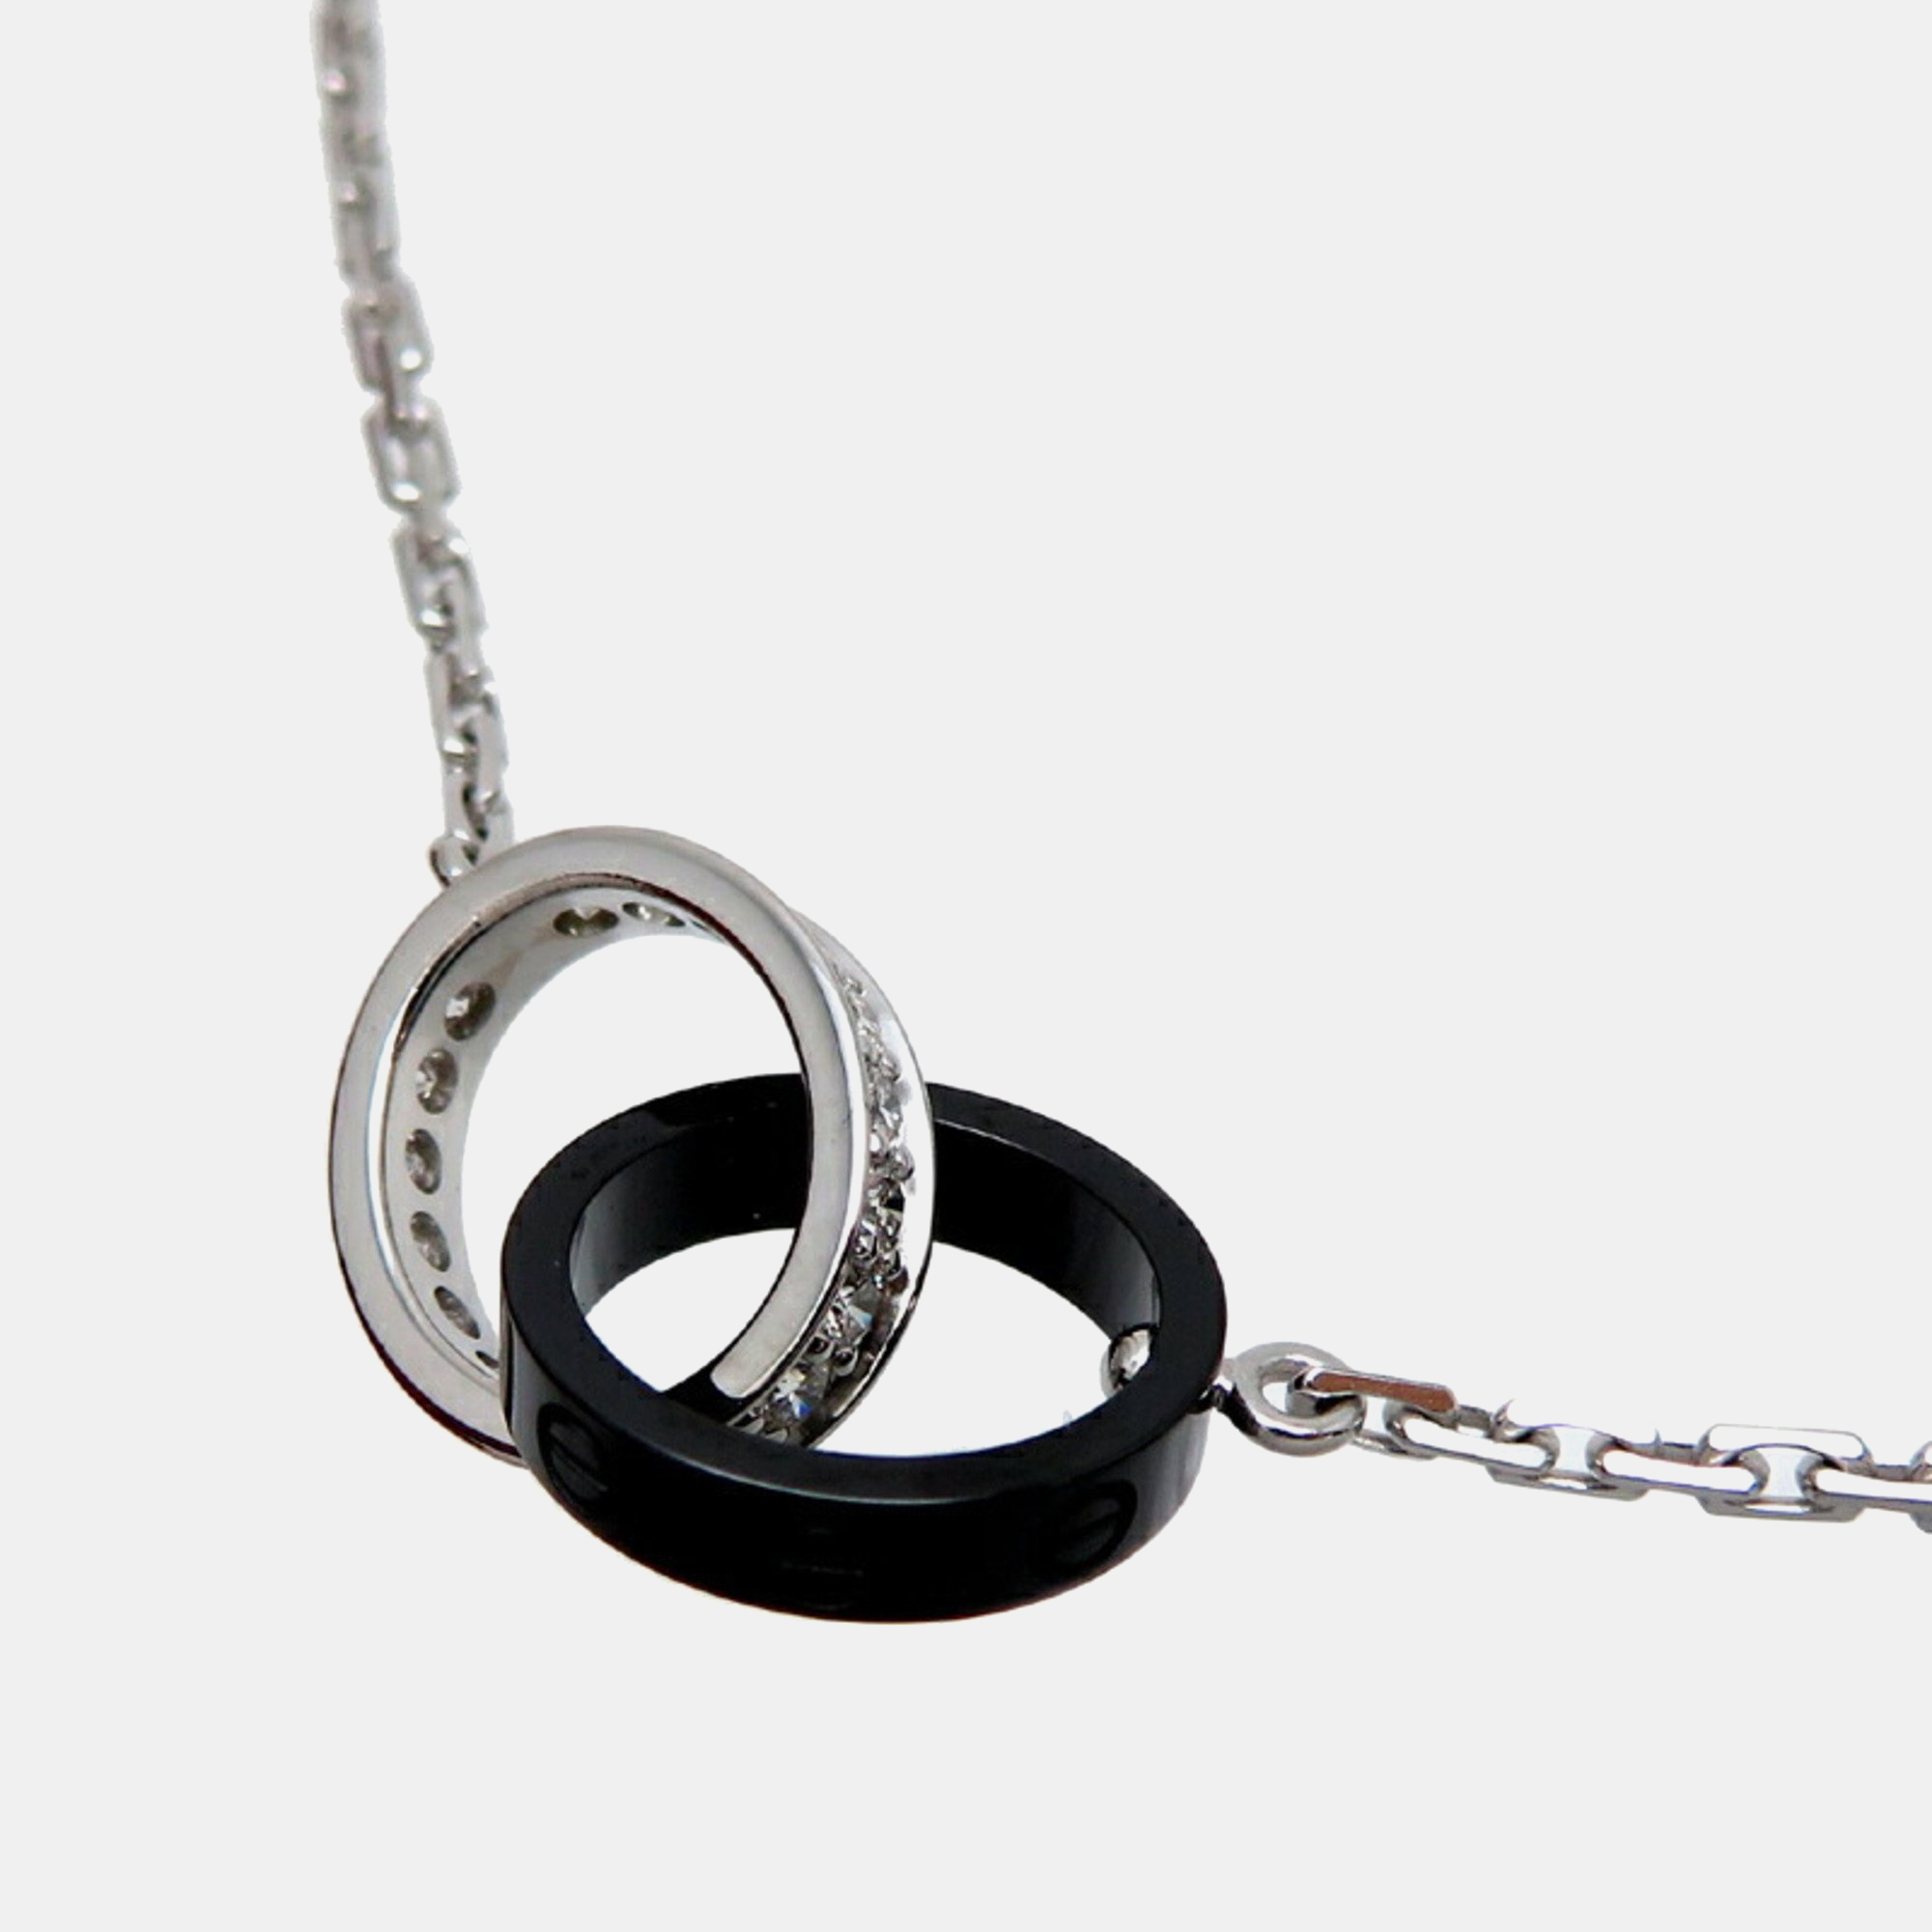 Cartier 18k white gold and diamond paved love pendant necklace